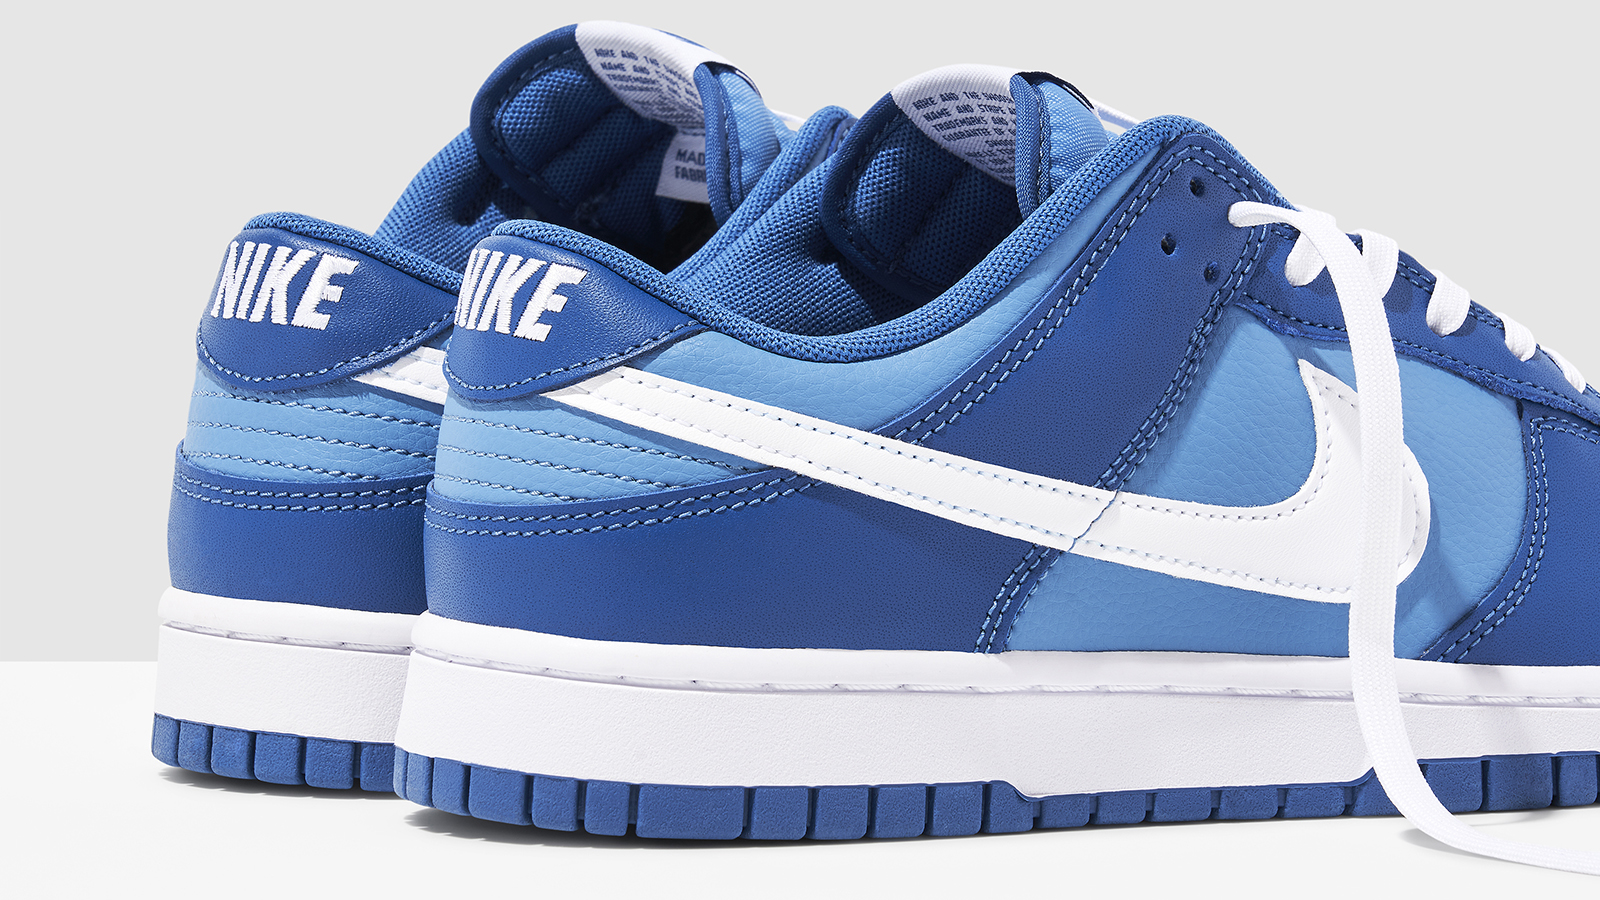 Summer Blues: From UNC to Marina, Here’s 4 Blue Kicks For Your Collection